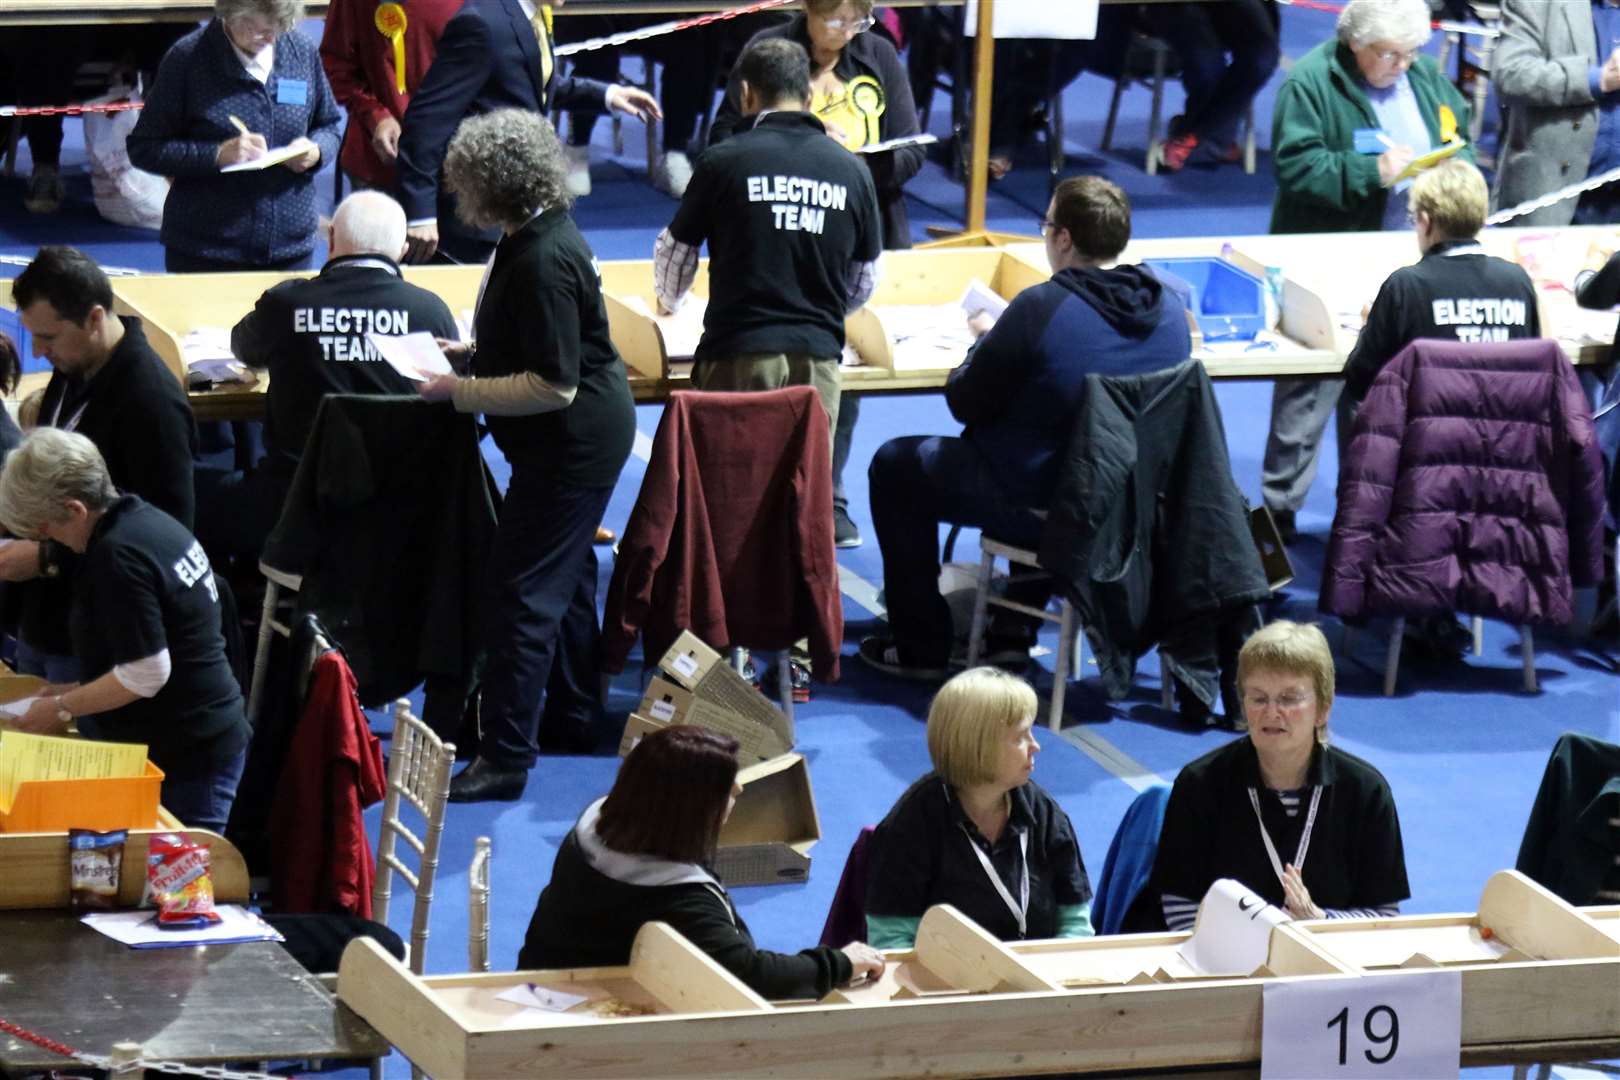 The general election count will take place overnight on Thursday.